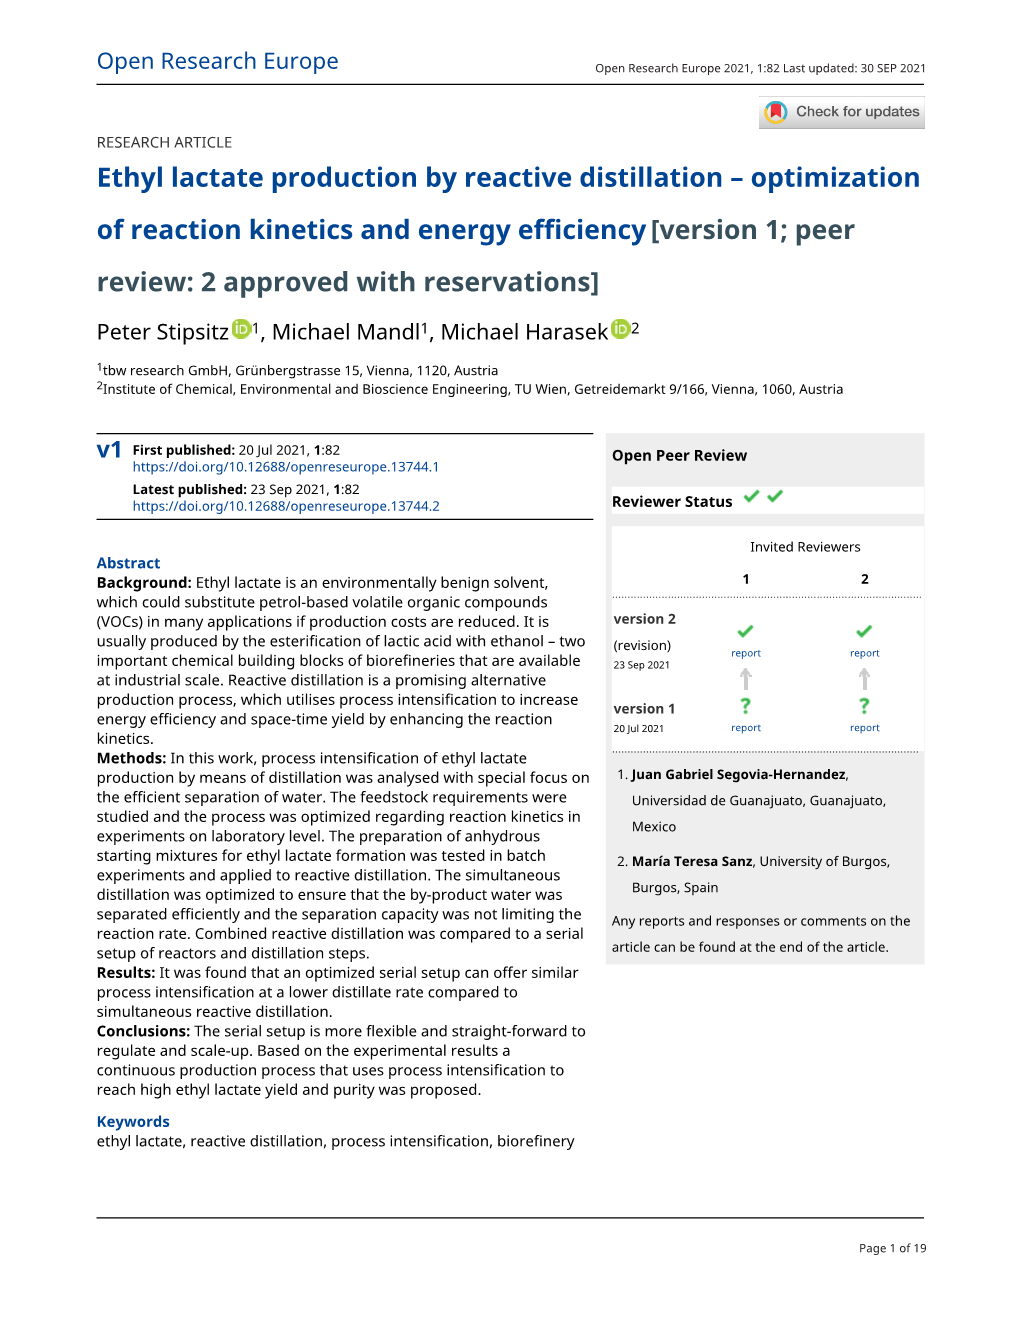 Ethyl Lactate Production by Reactive Distillation – Optimization of Reaction Kinetics and Energy Efficiency[Version 1; Peer Re